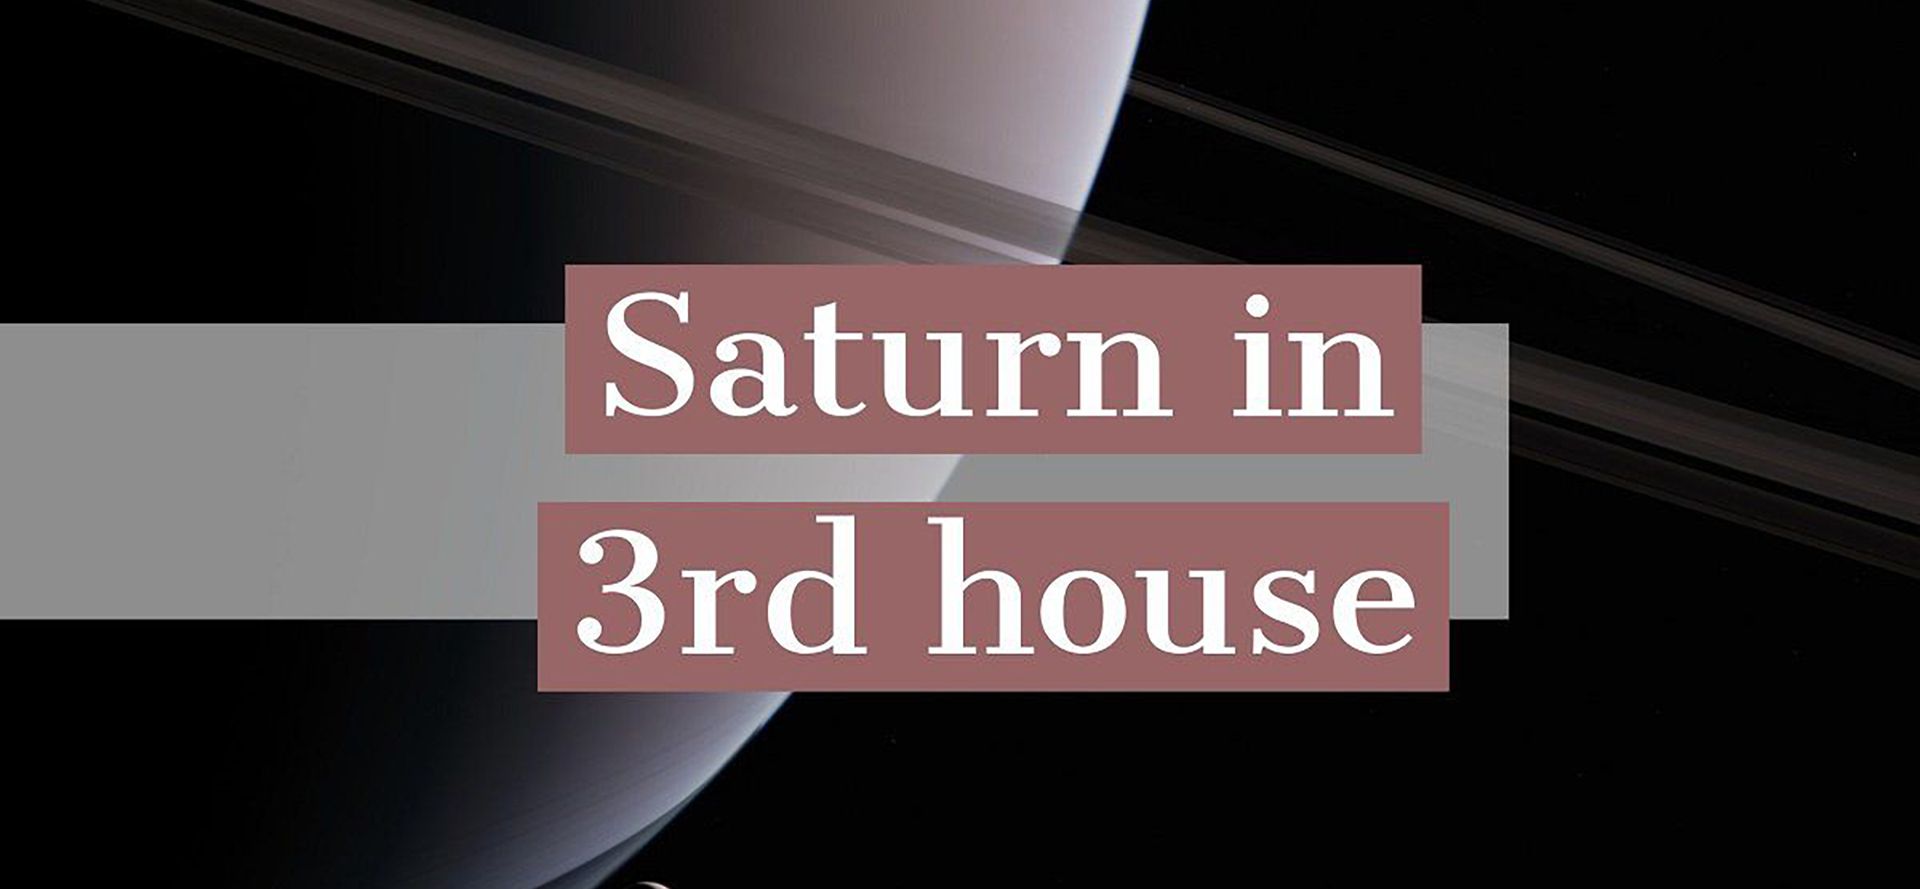 Saturn in 3rd house.